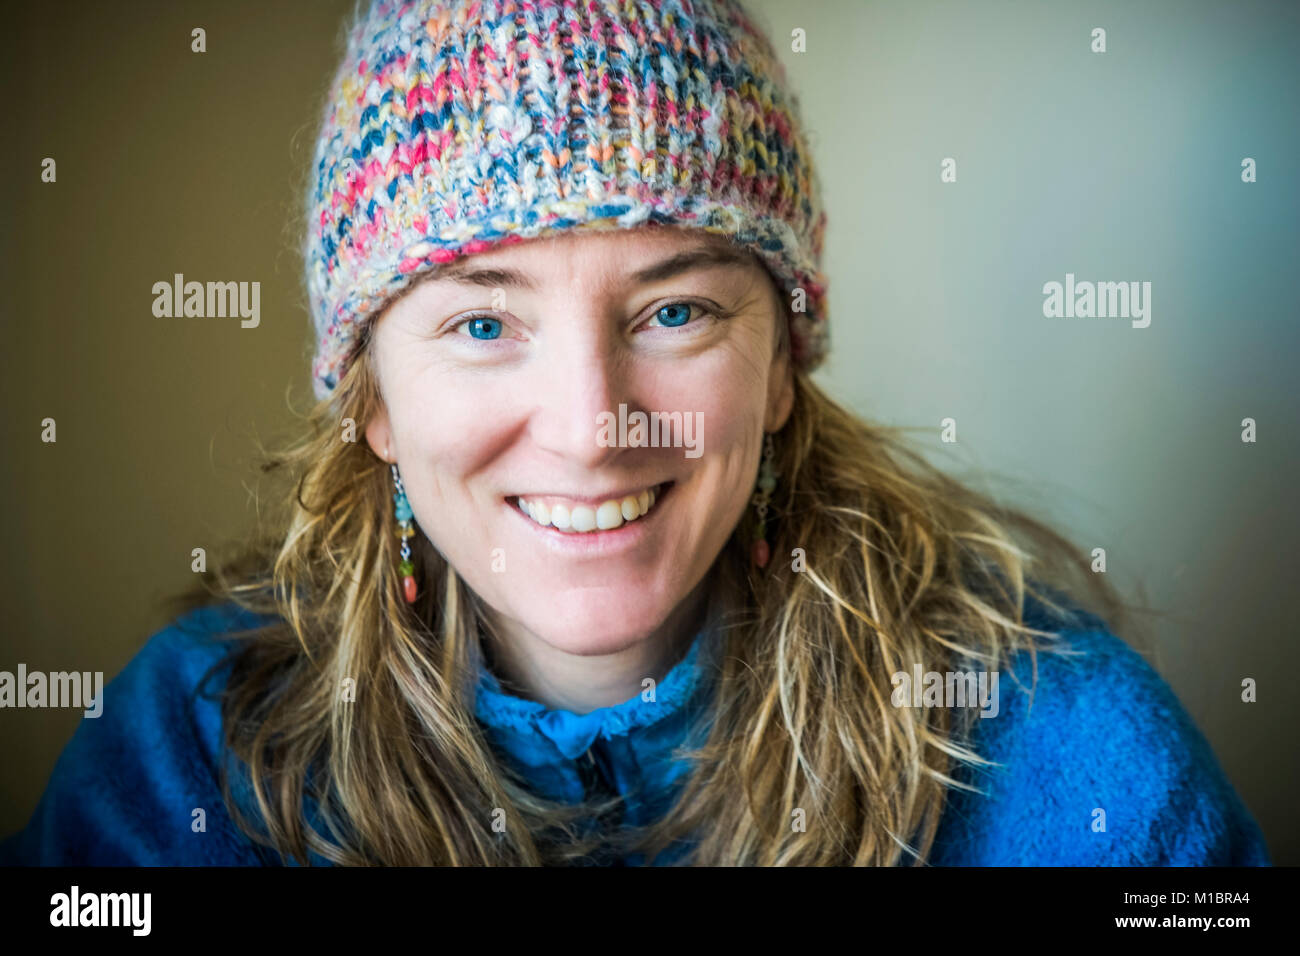 Smiling portrait of a late 30's woman in a knit hat and fleece jacket with long blond hair  20070115 MR A Stock Photo